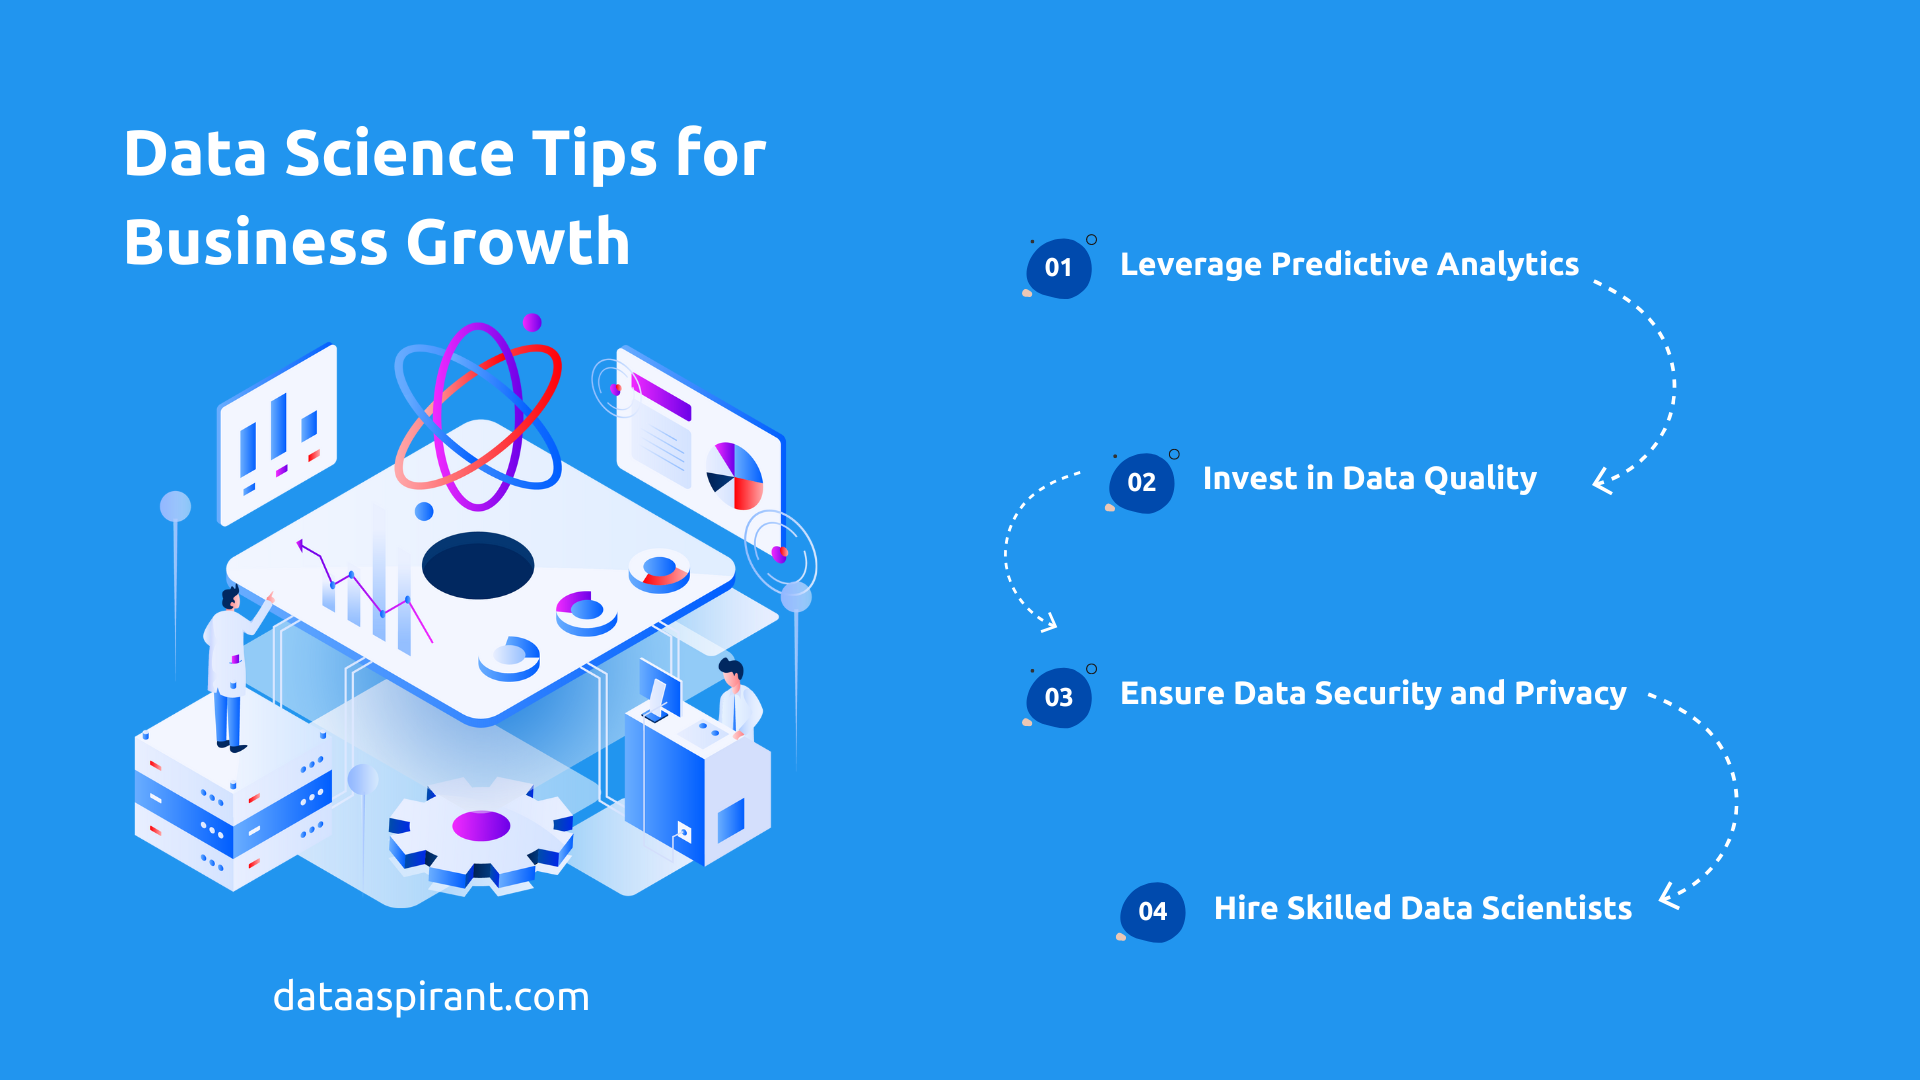 Data Science Tips for Business Growth and Profitability